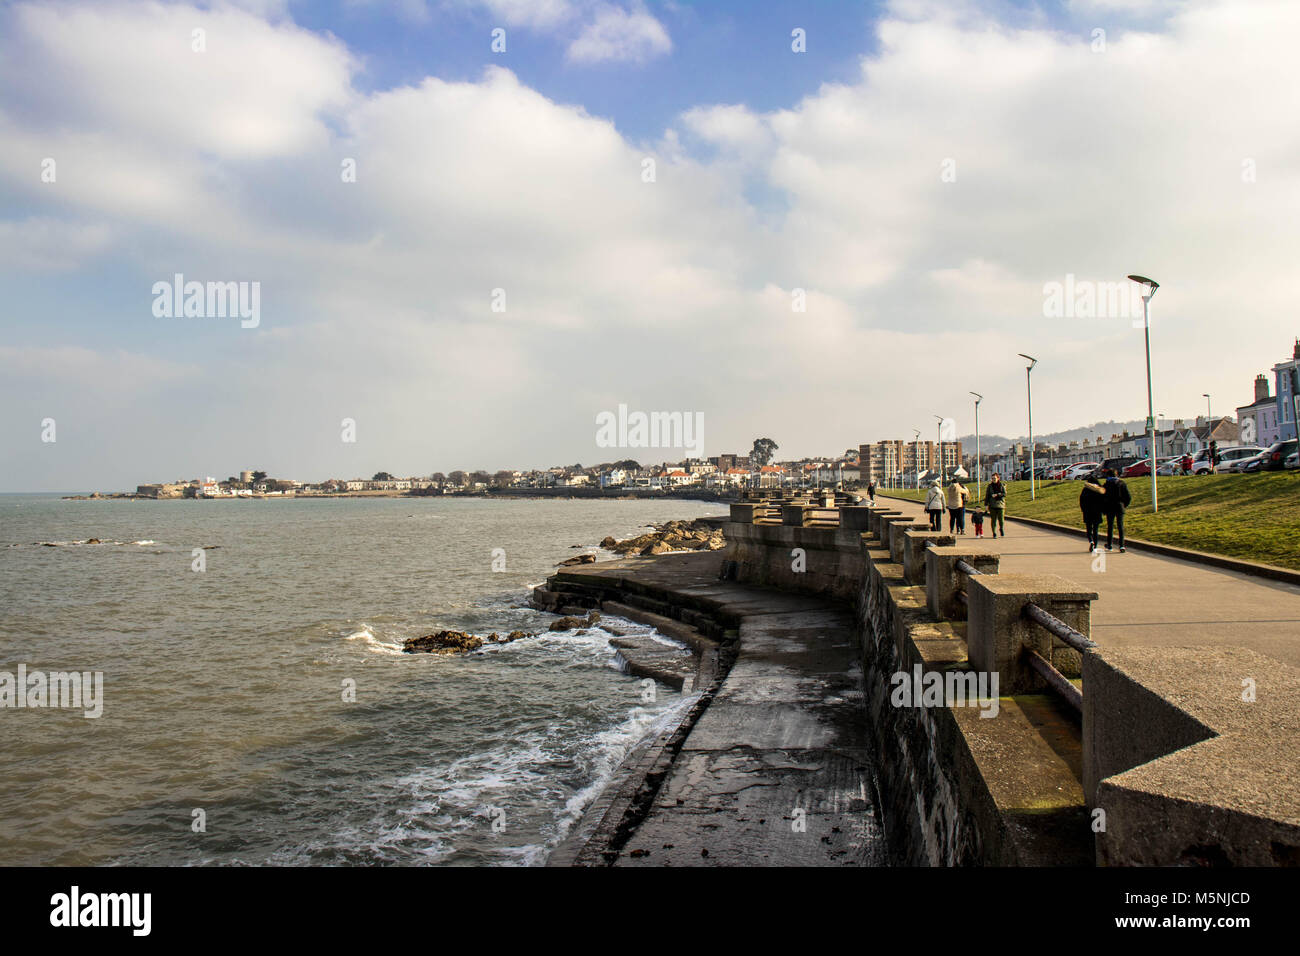 A view of the promenade at Scotsman Bay, Dun Laoghaire, Dublin. Stock Photo